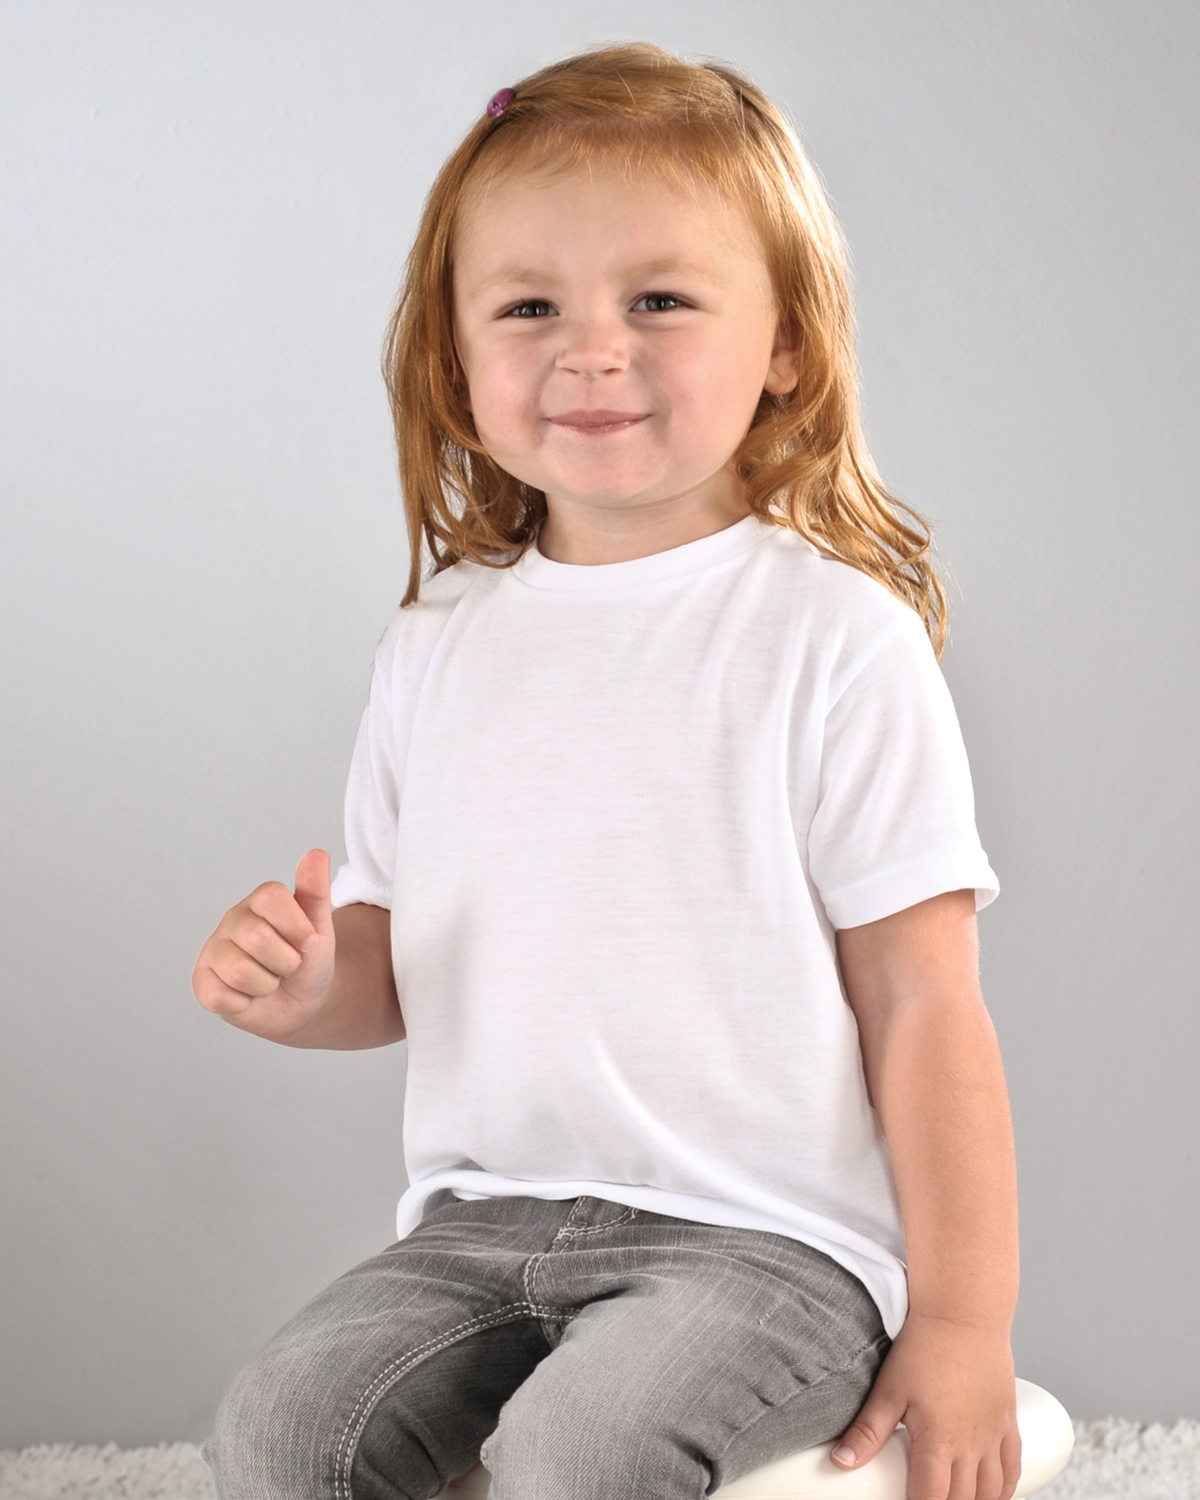 Sublivie 1310 Toddler Sublimation Polyester T-Shirt White 4T